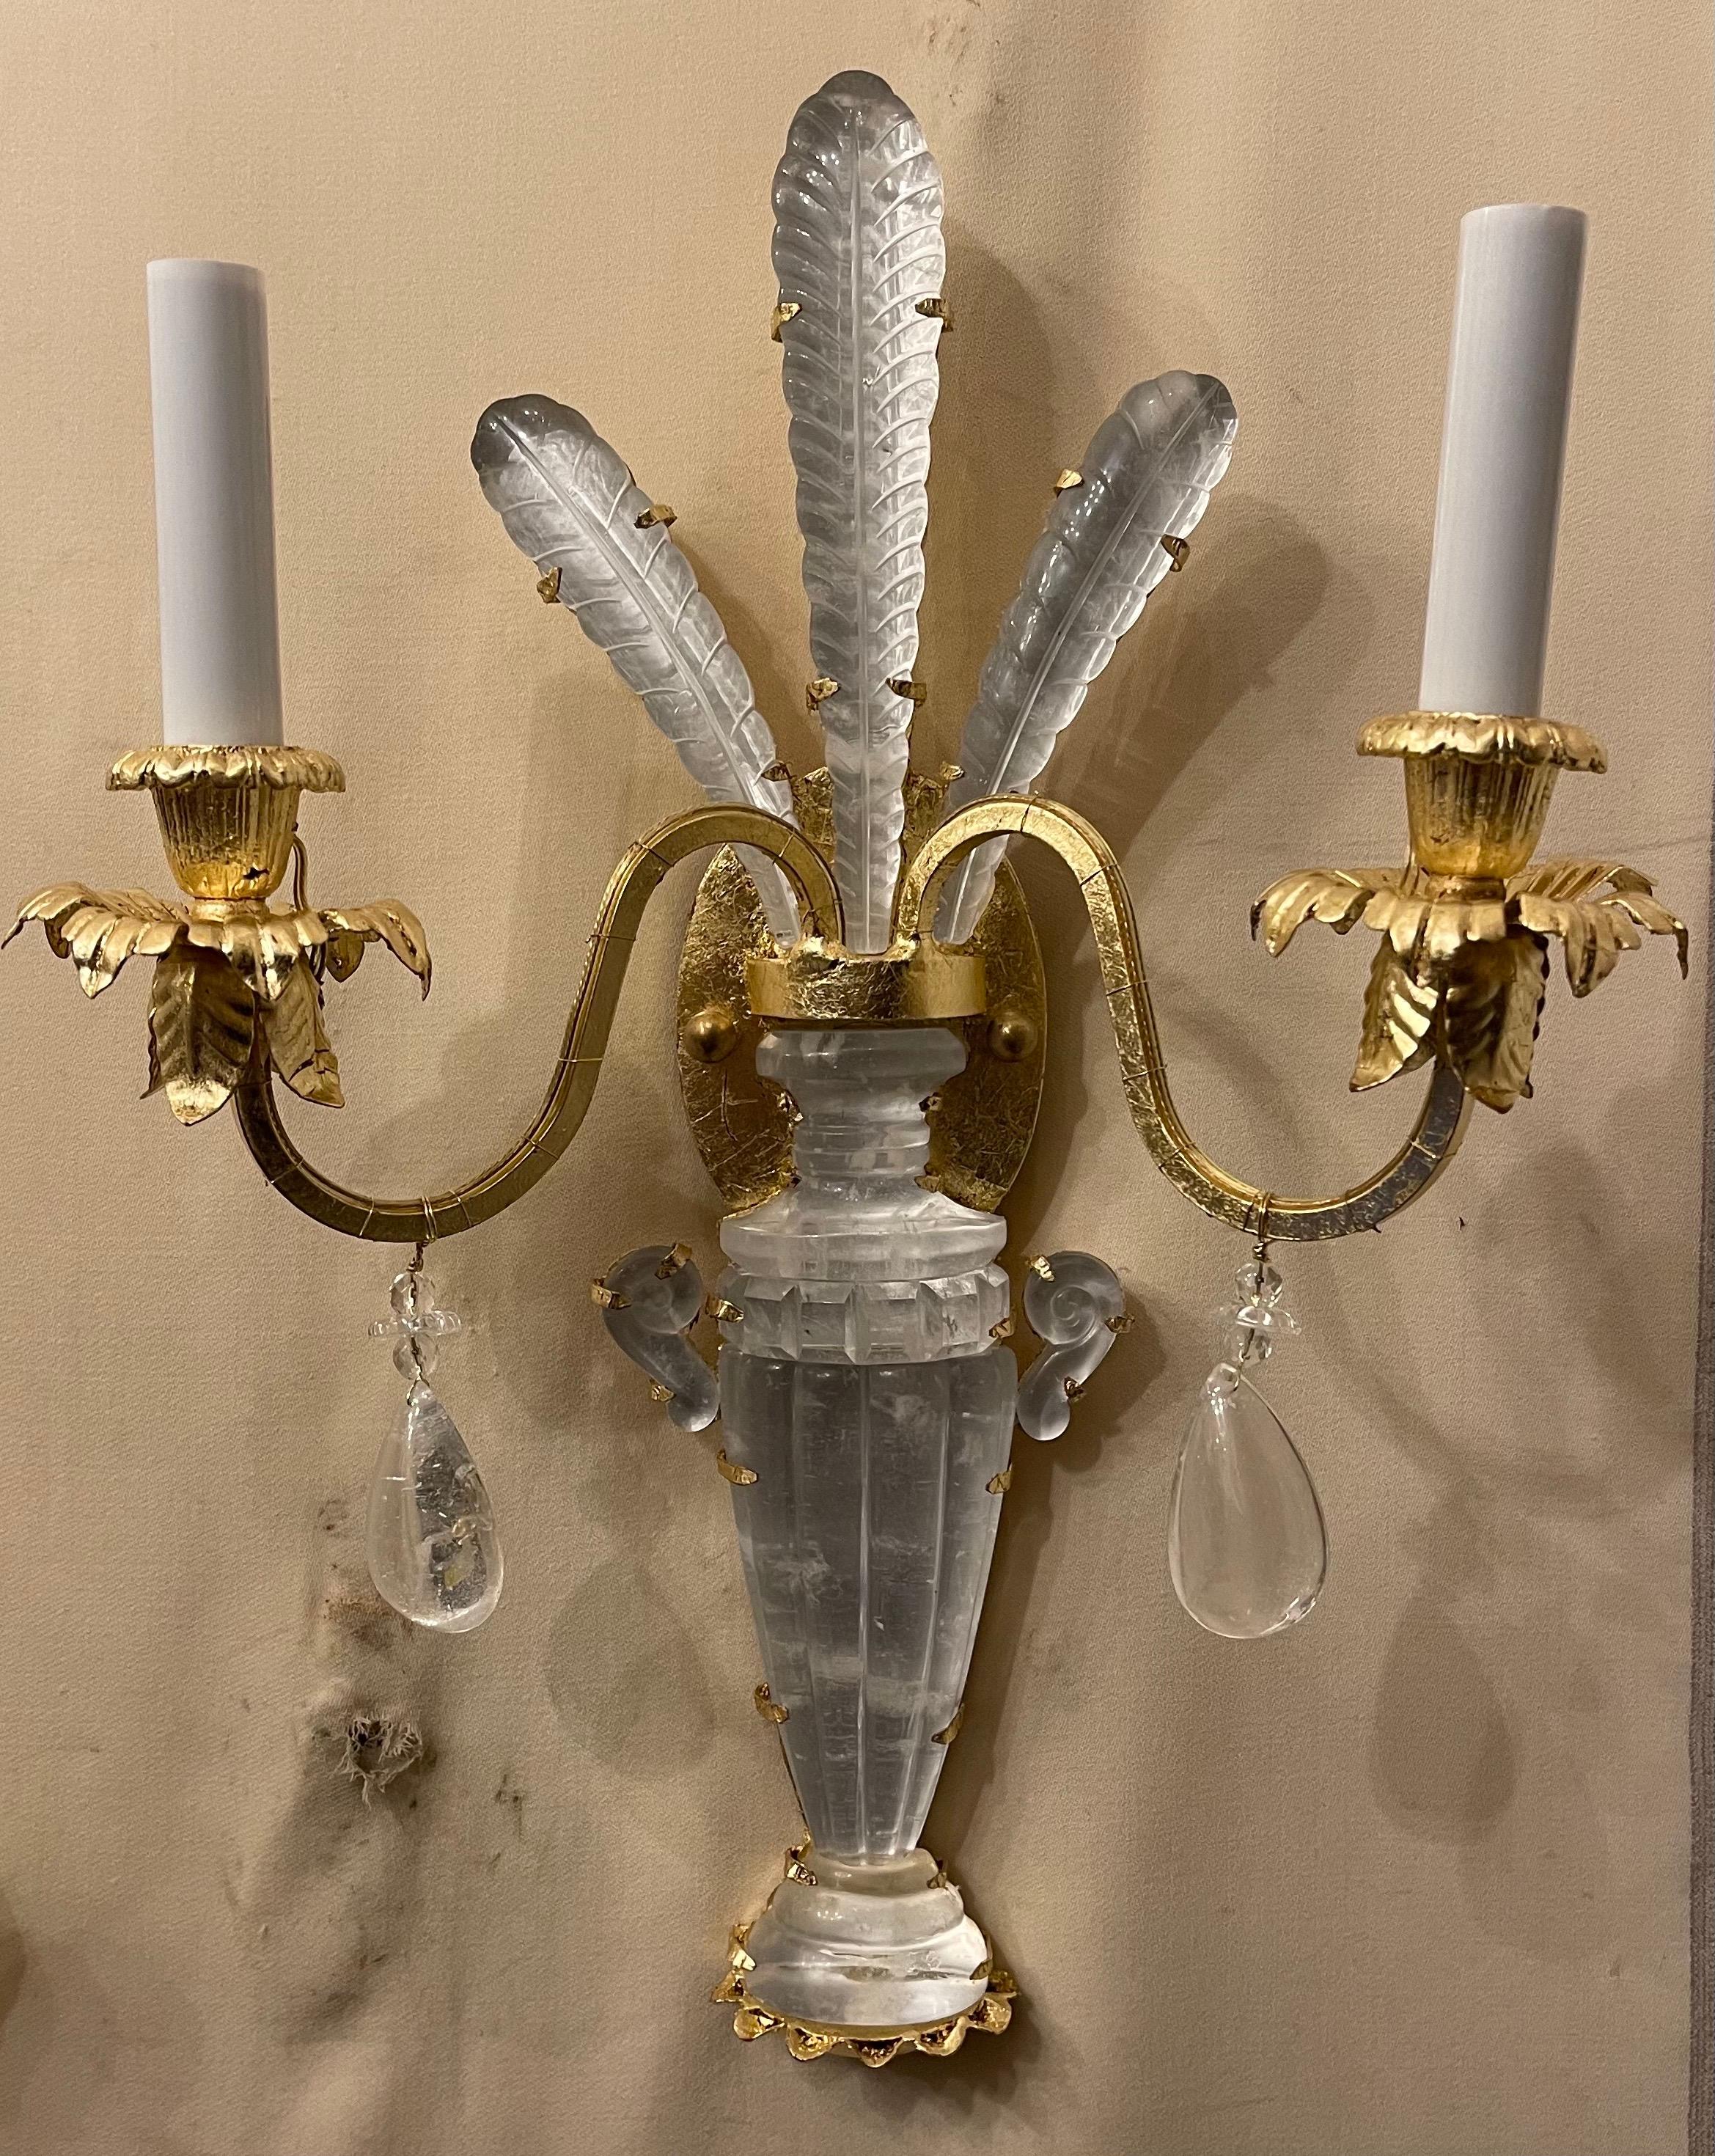 A Wonderful set of six Mid-Century Modern palm leaf urn rock crystal sconces in the manner of Maison Baguès
3 Pairs of sconces available
Each pair sold separately.